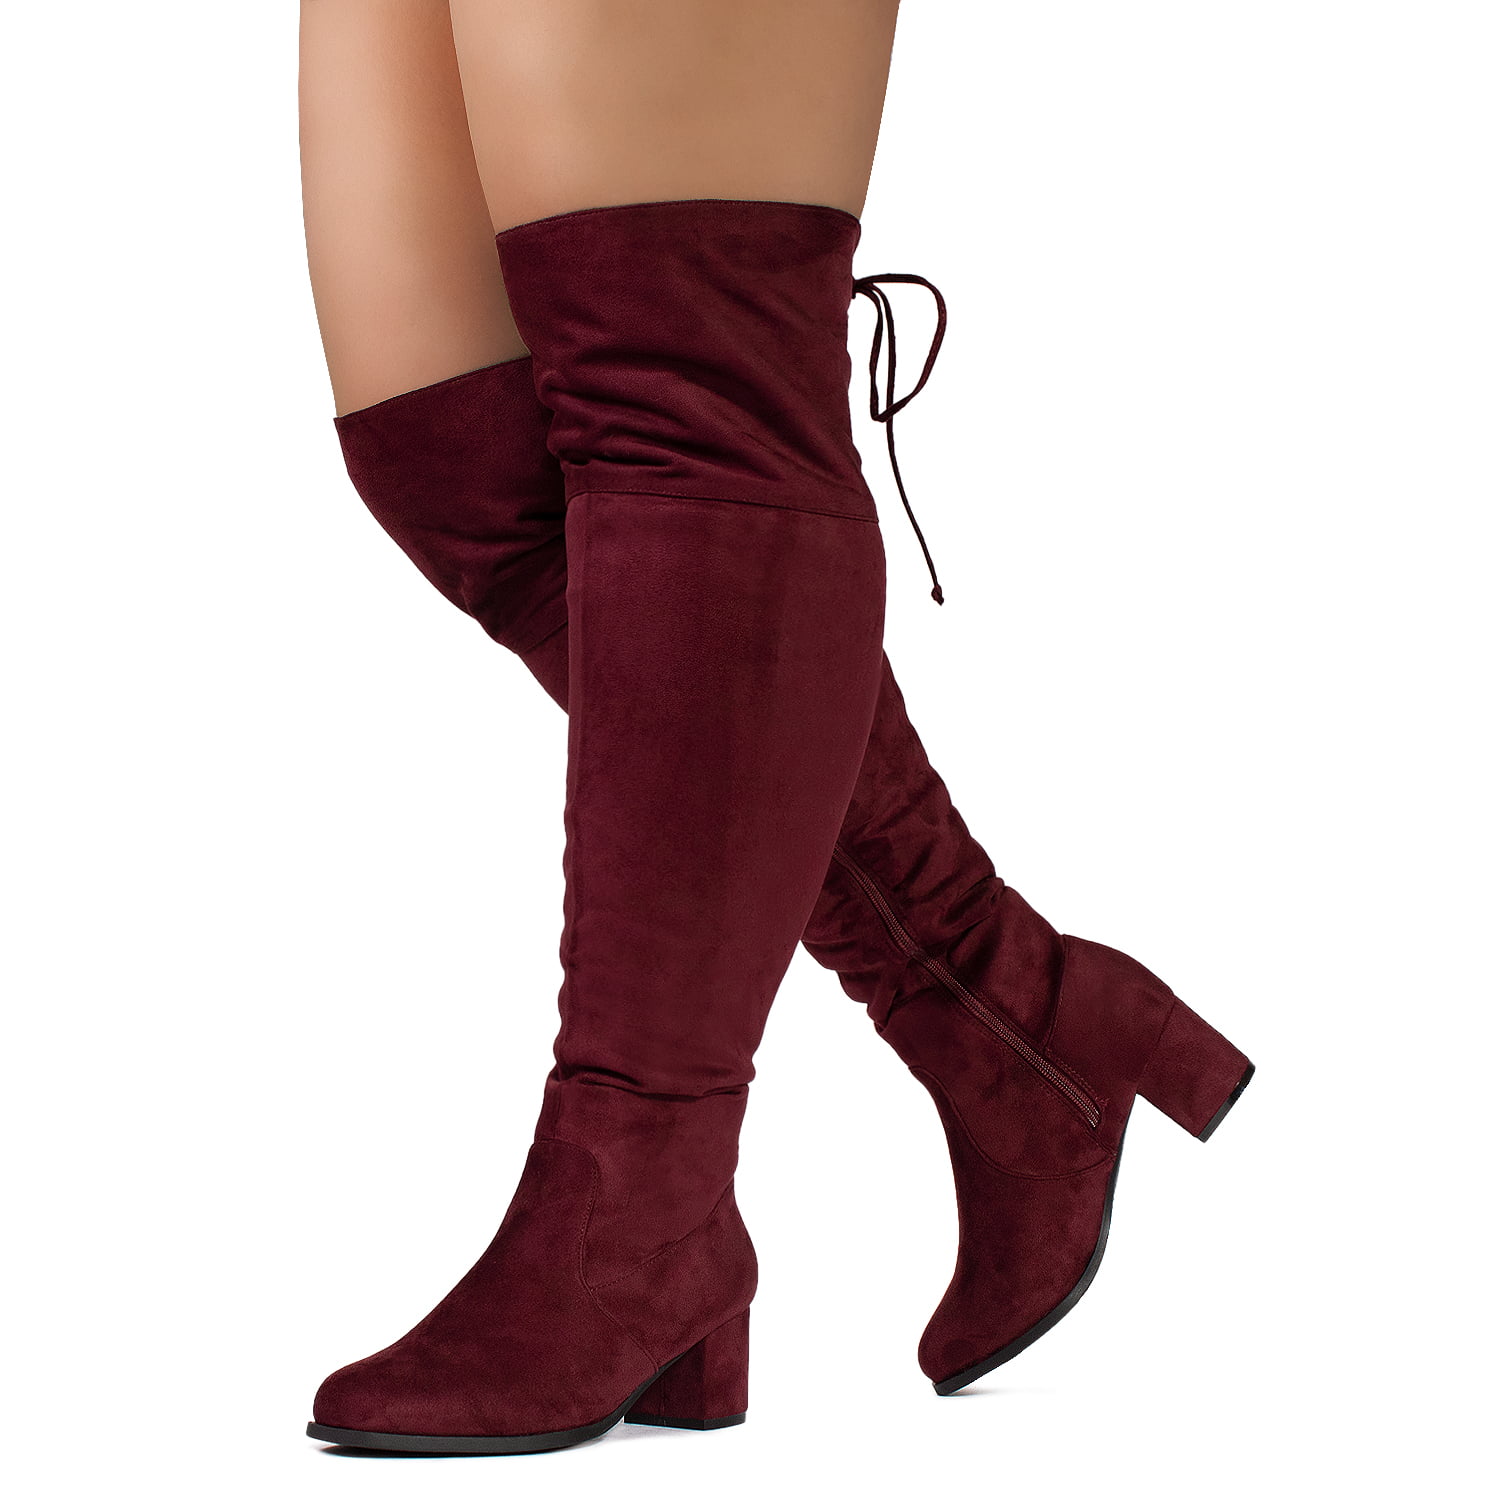 Room Of Fashion "Wide Calf & Wide Width" Women's Chunky Heel Over The Knee Boots Plus Size